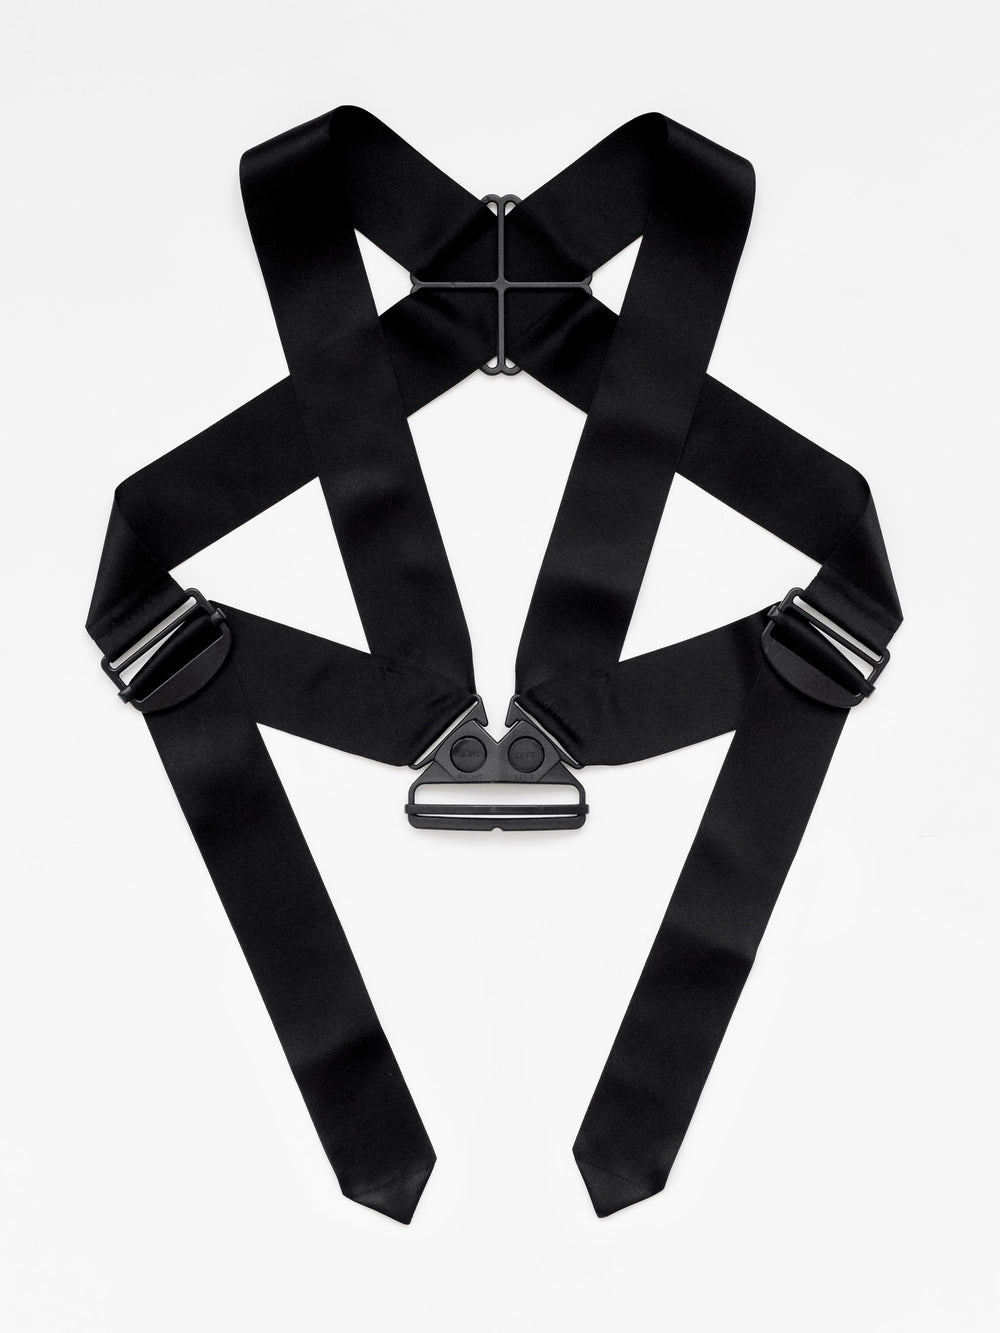 Helmut Lang AW03 Safety Cage Parachute Harness Silk Facsimile